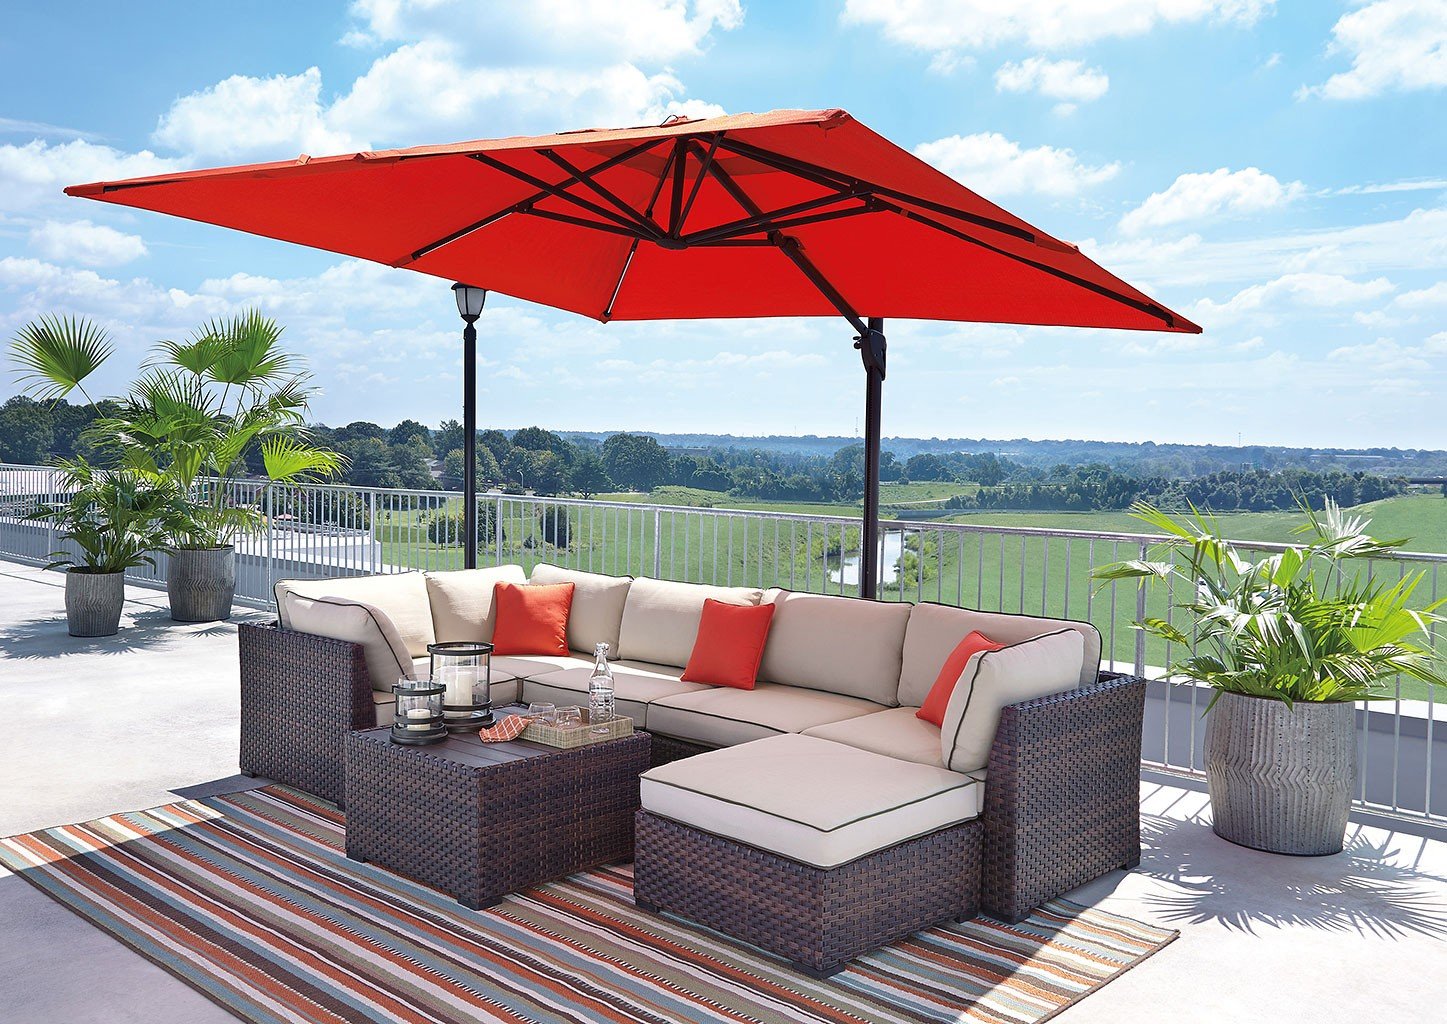 Renway Modular Outdoor Sectional Set w/ Umbrella by Signature Design by Ashley FurniturePick